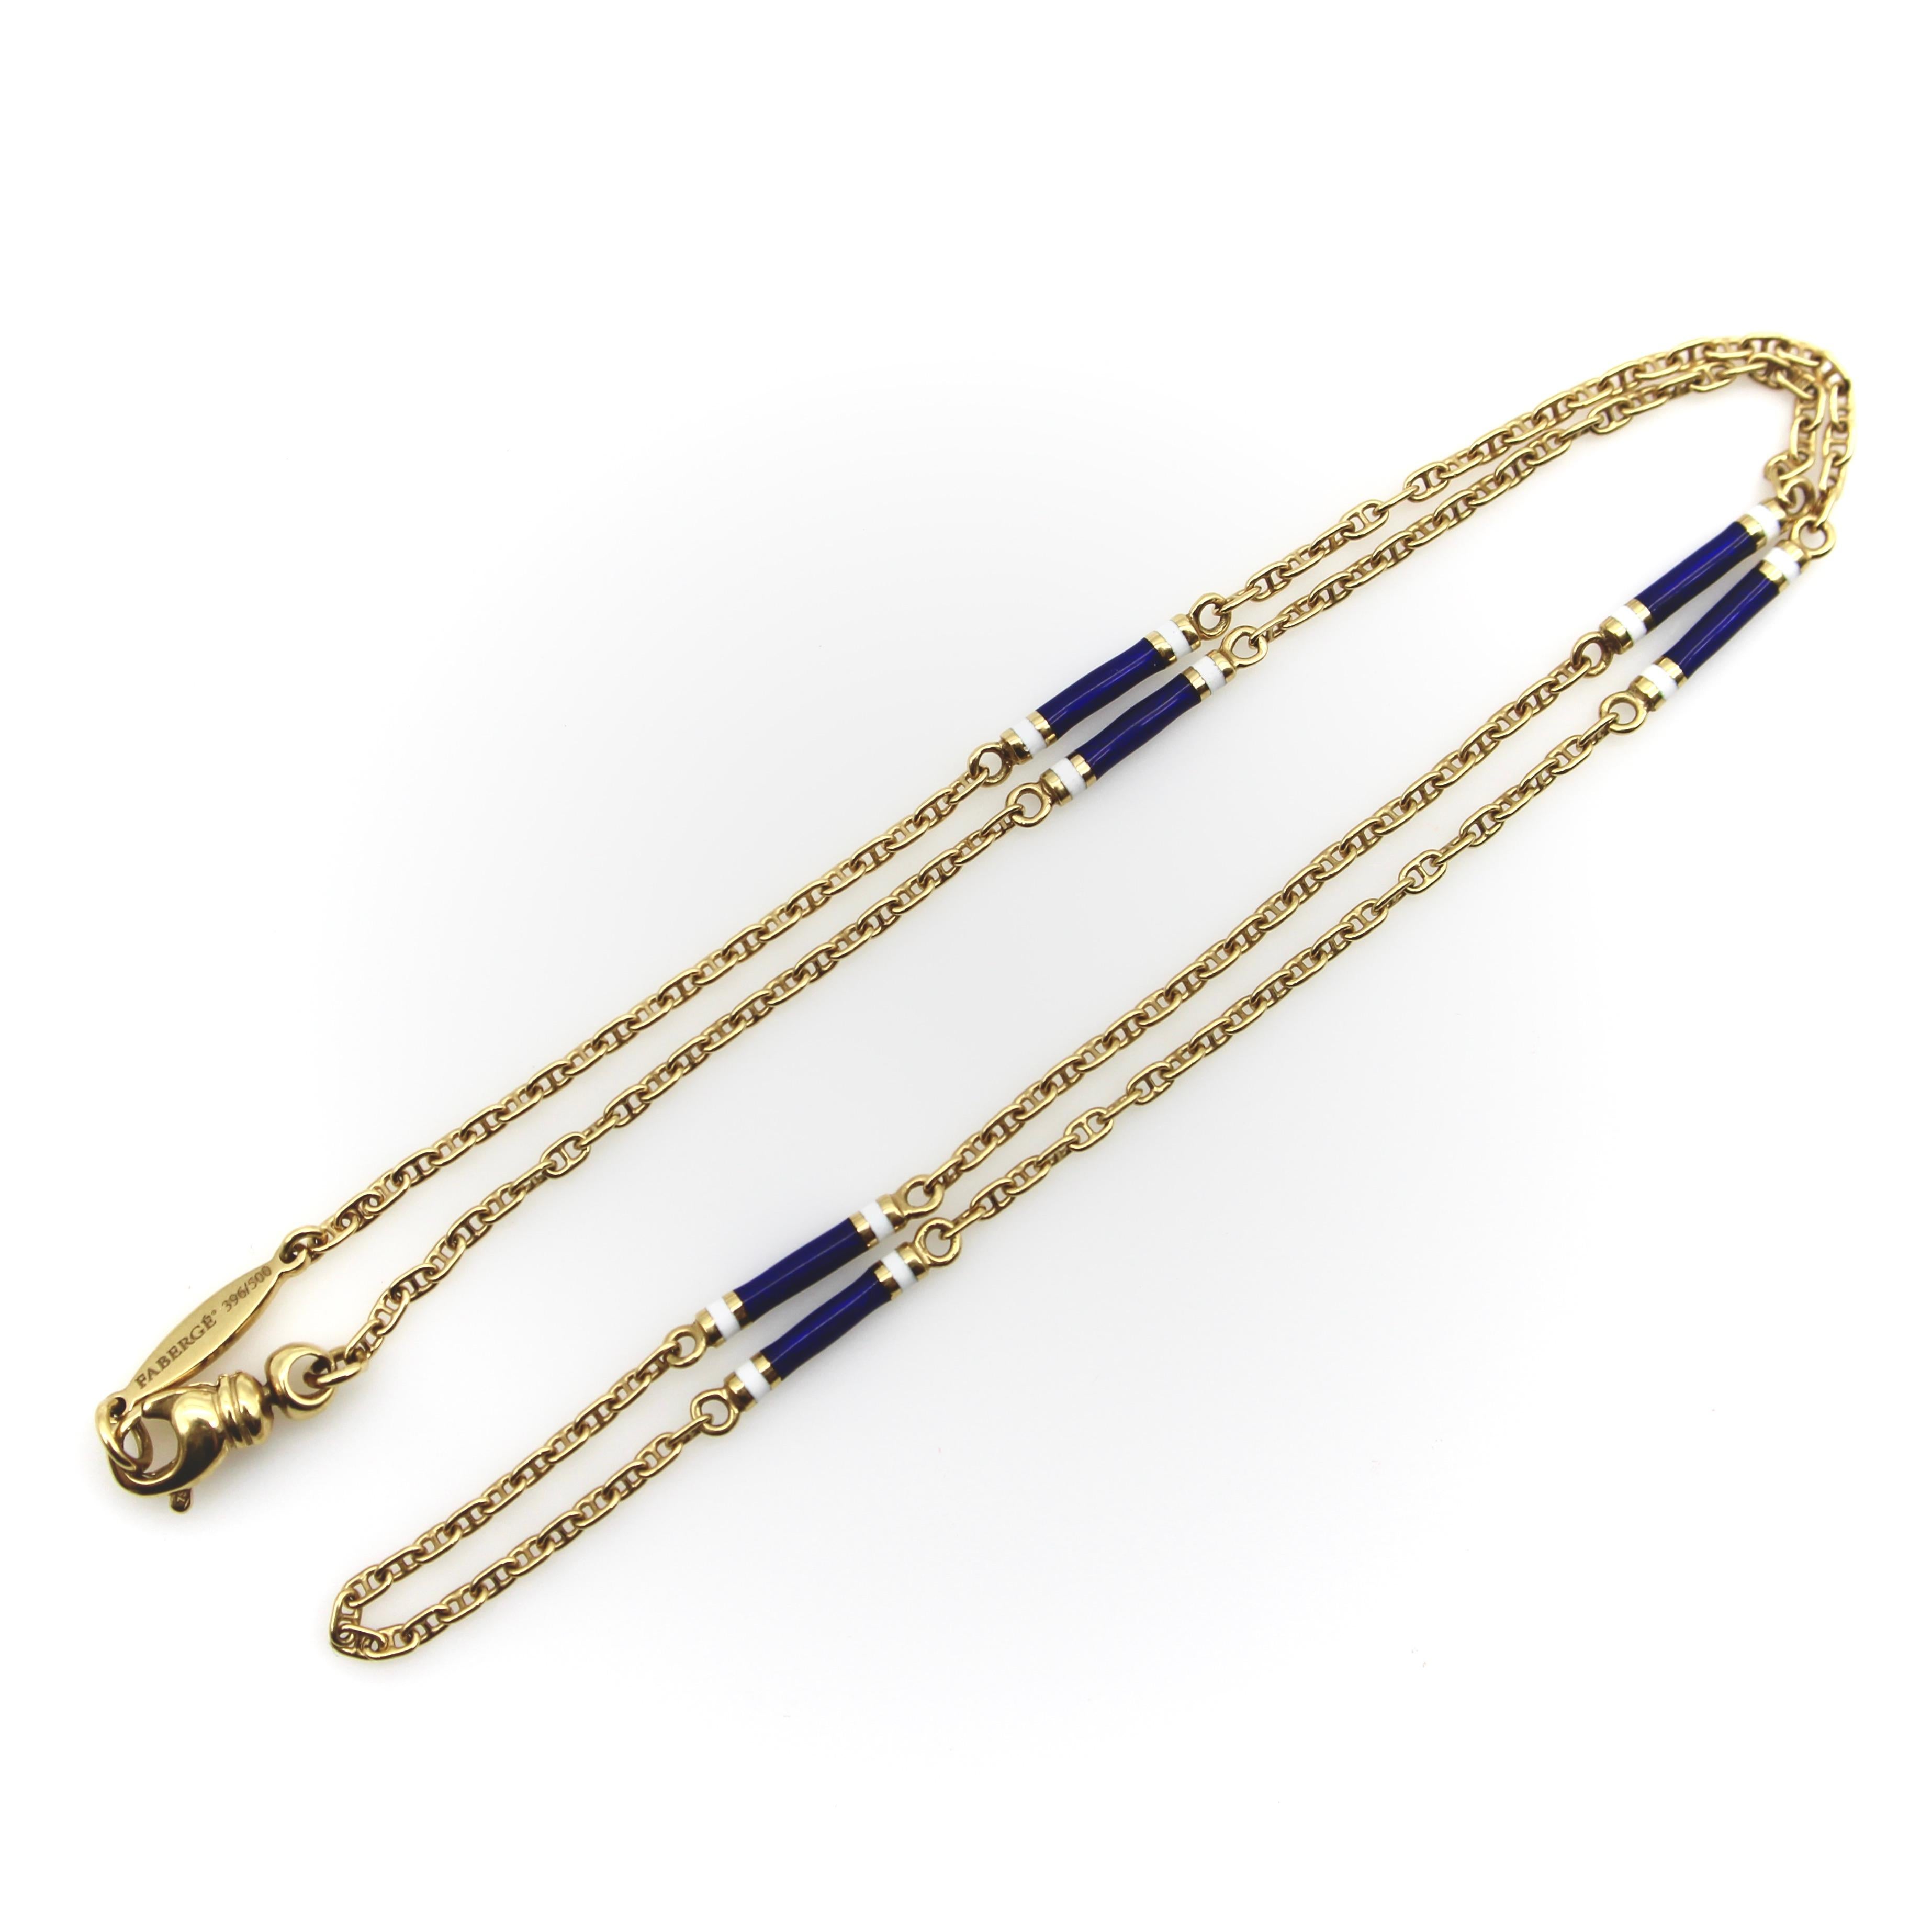 Fabergé 18K Gold Mariners Link Chain with Guilloché Enamel Stations  1